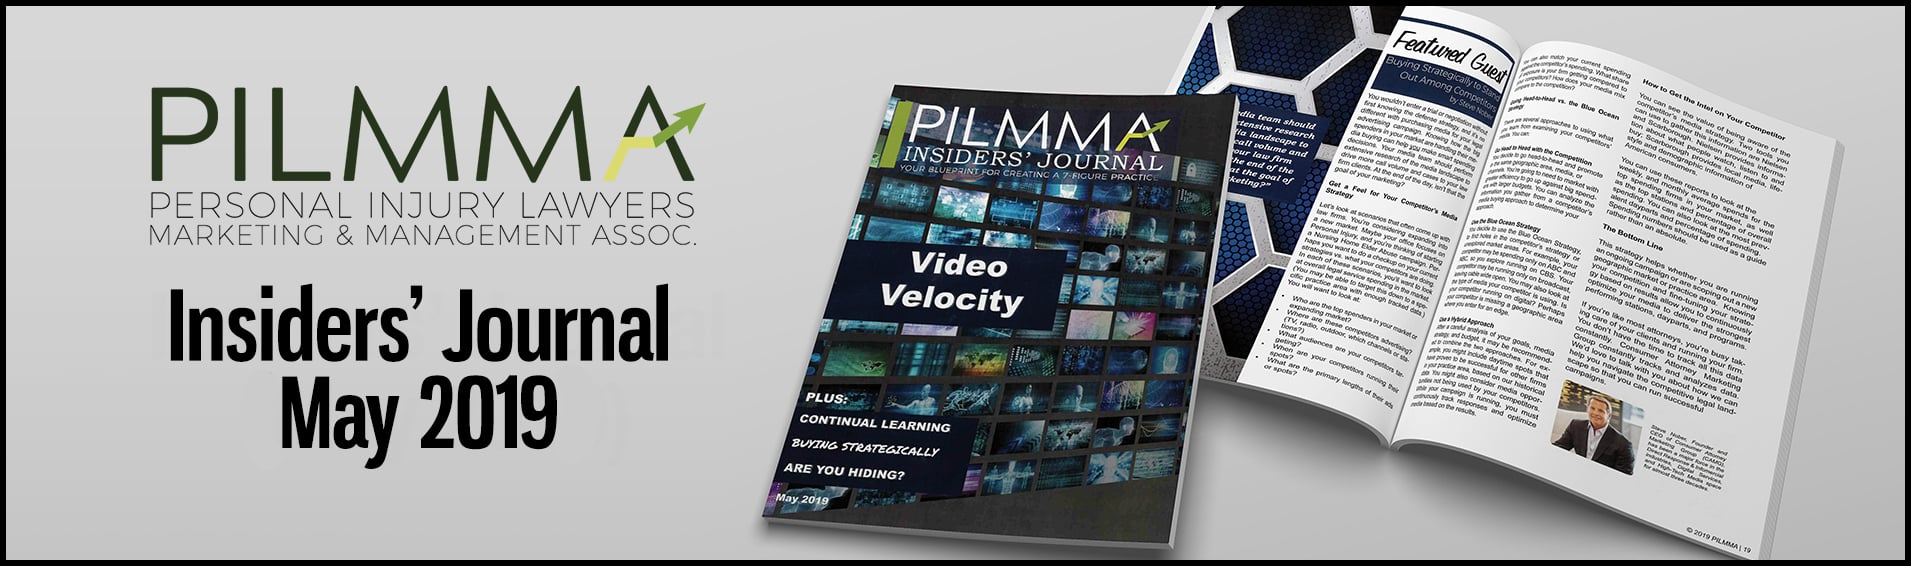 Graphic showing the PILMMA Insiders' Journal May 2019